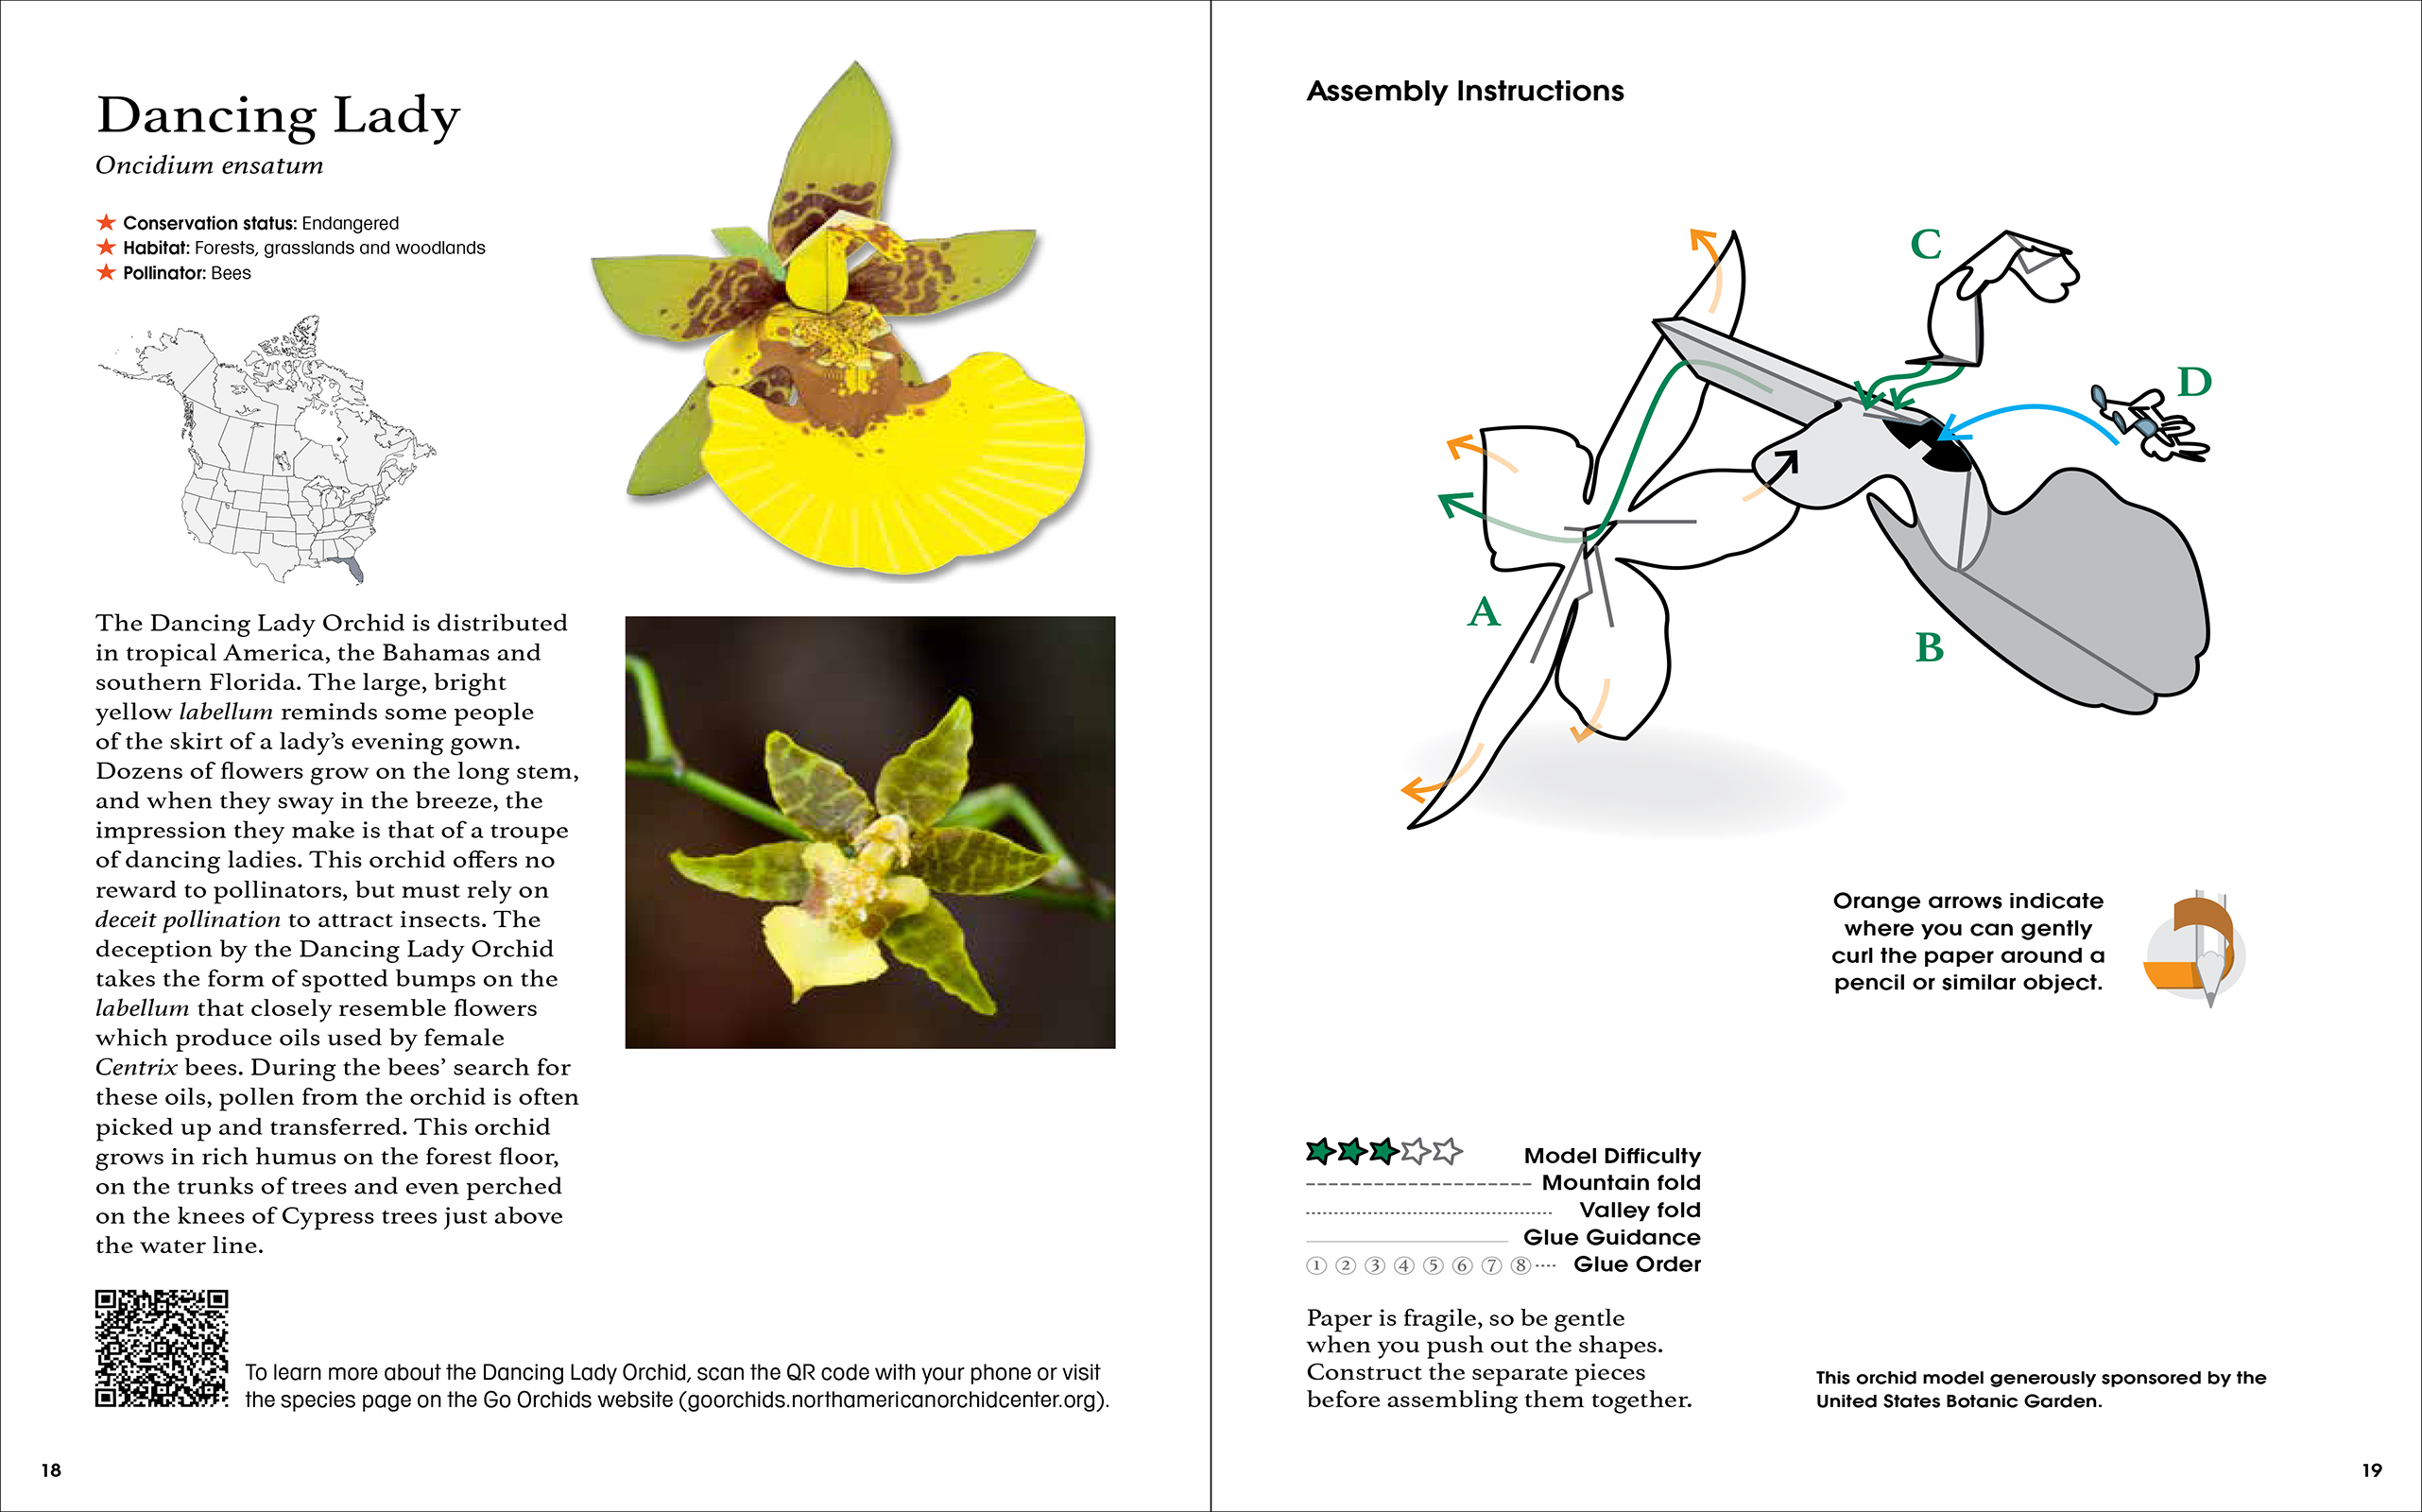 Origami Orchids Kit